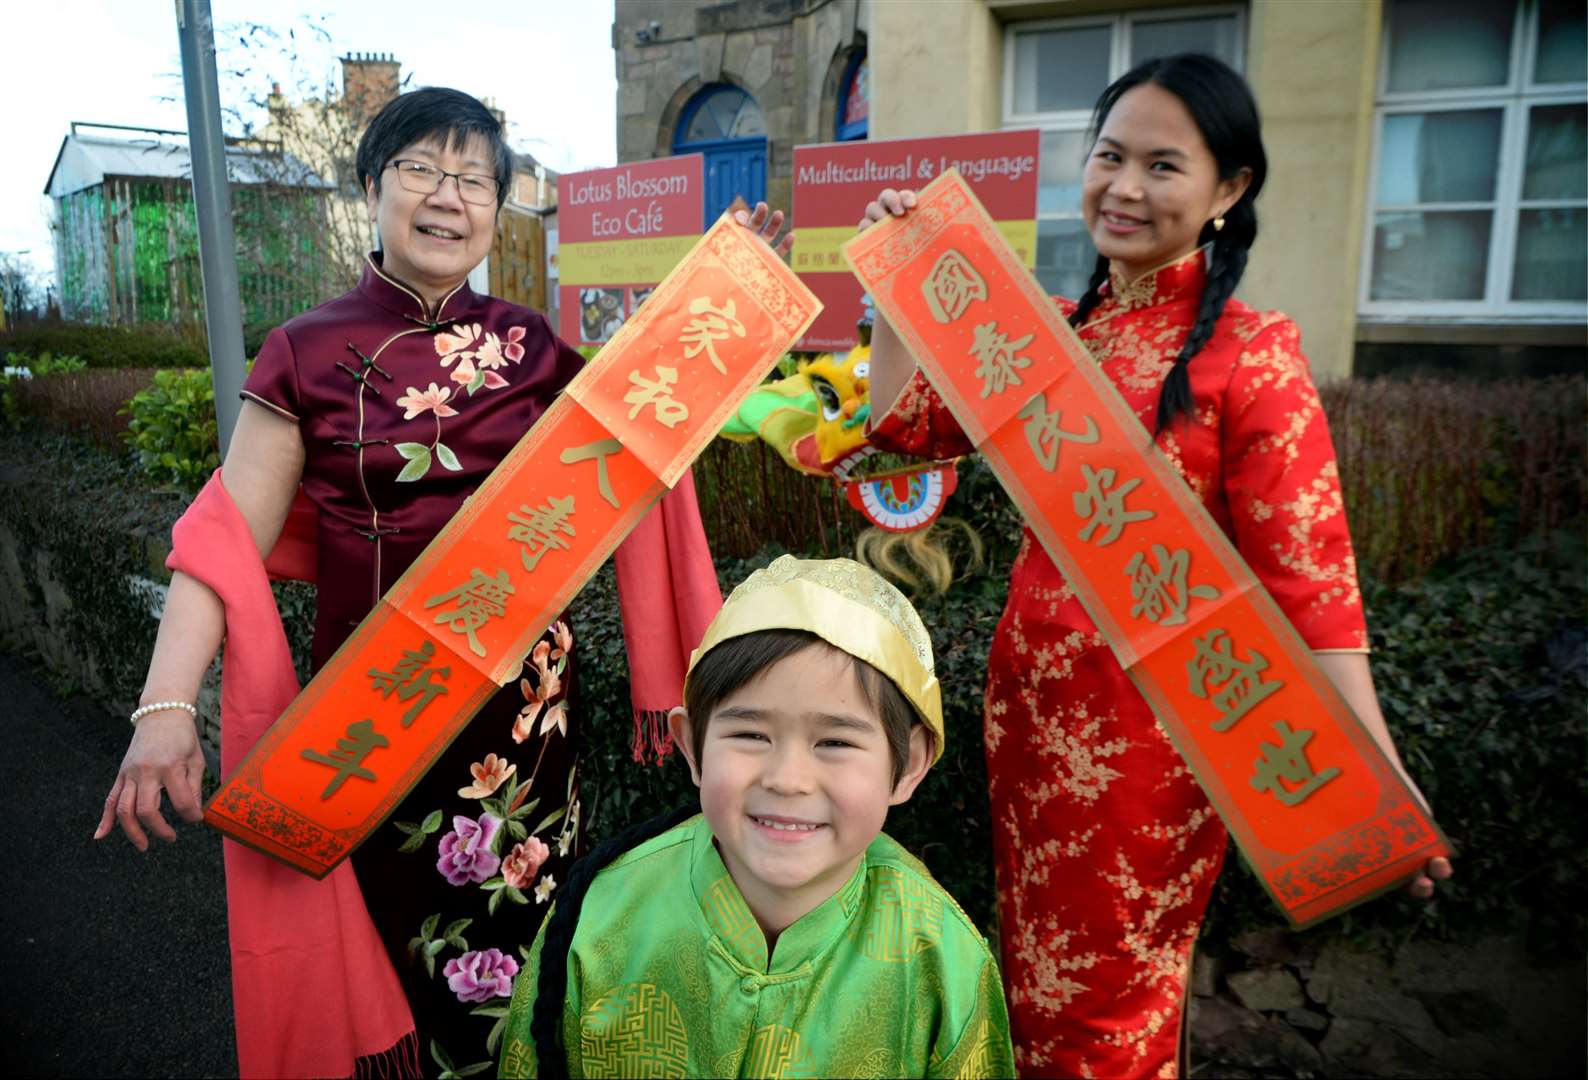 Charlie Haywood joins Monica Lee-Macpherson, SHIMCA chairperson (left) and Tina Cui, cafê manager, at the SHIMCA Eco Café on Ardconnel Terrace to welcome the Chinese New Year. Picture: James Mackenzie.